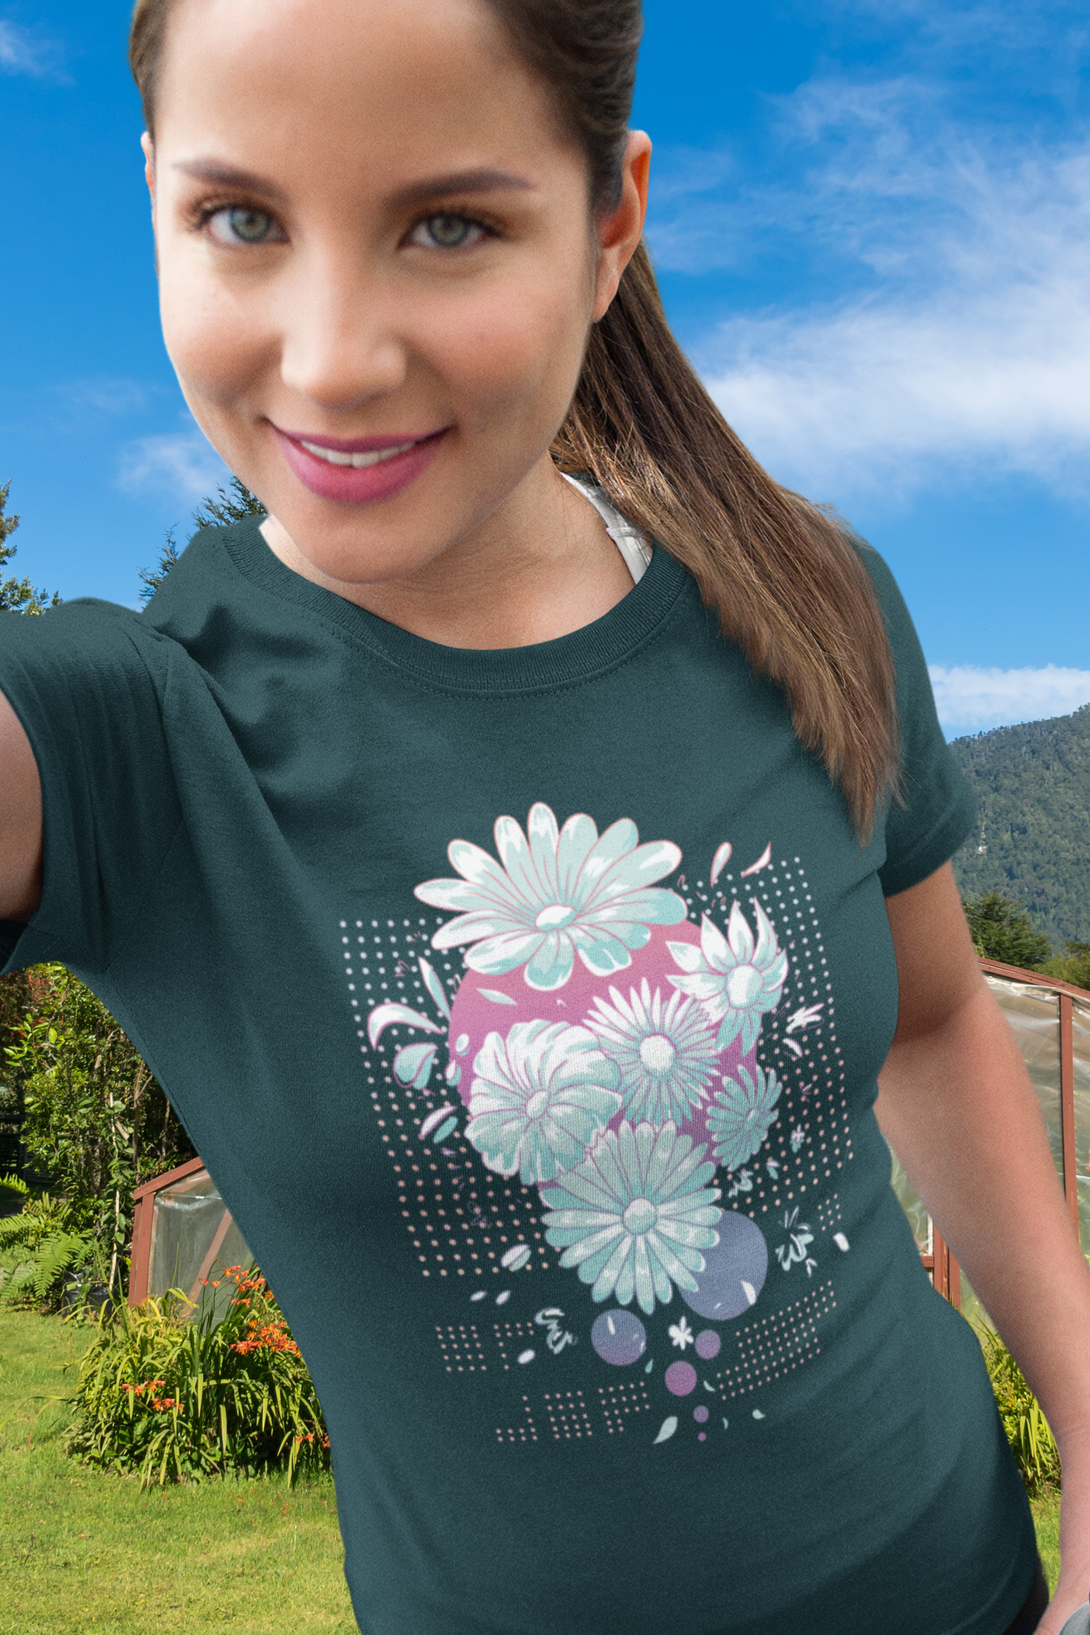 Daisy Delight Printed T-Shirt For Women - WowWaves - 10